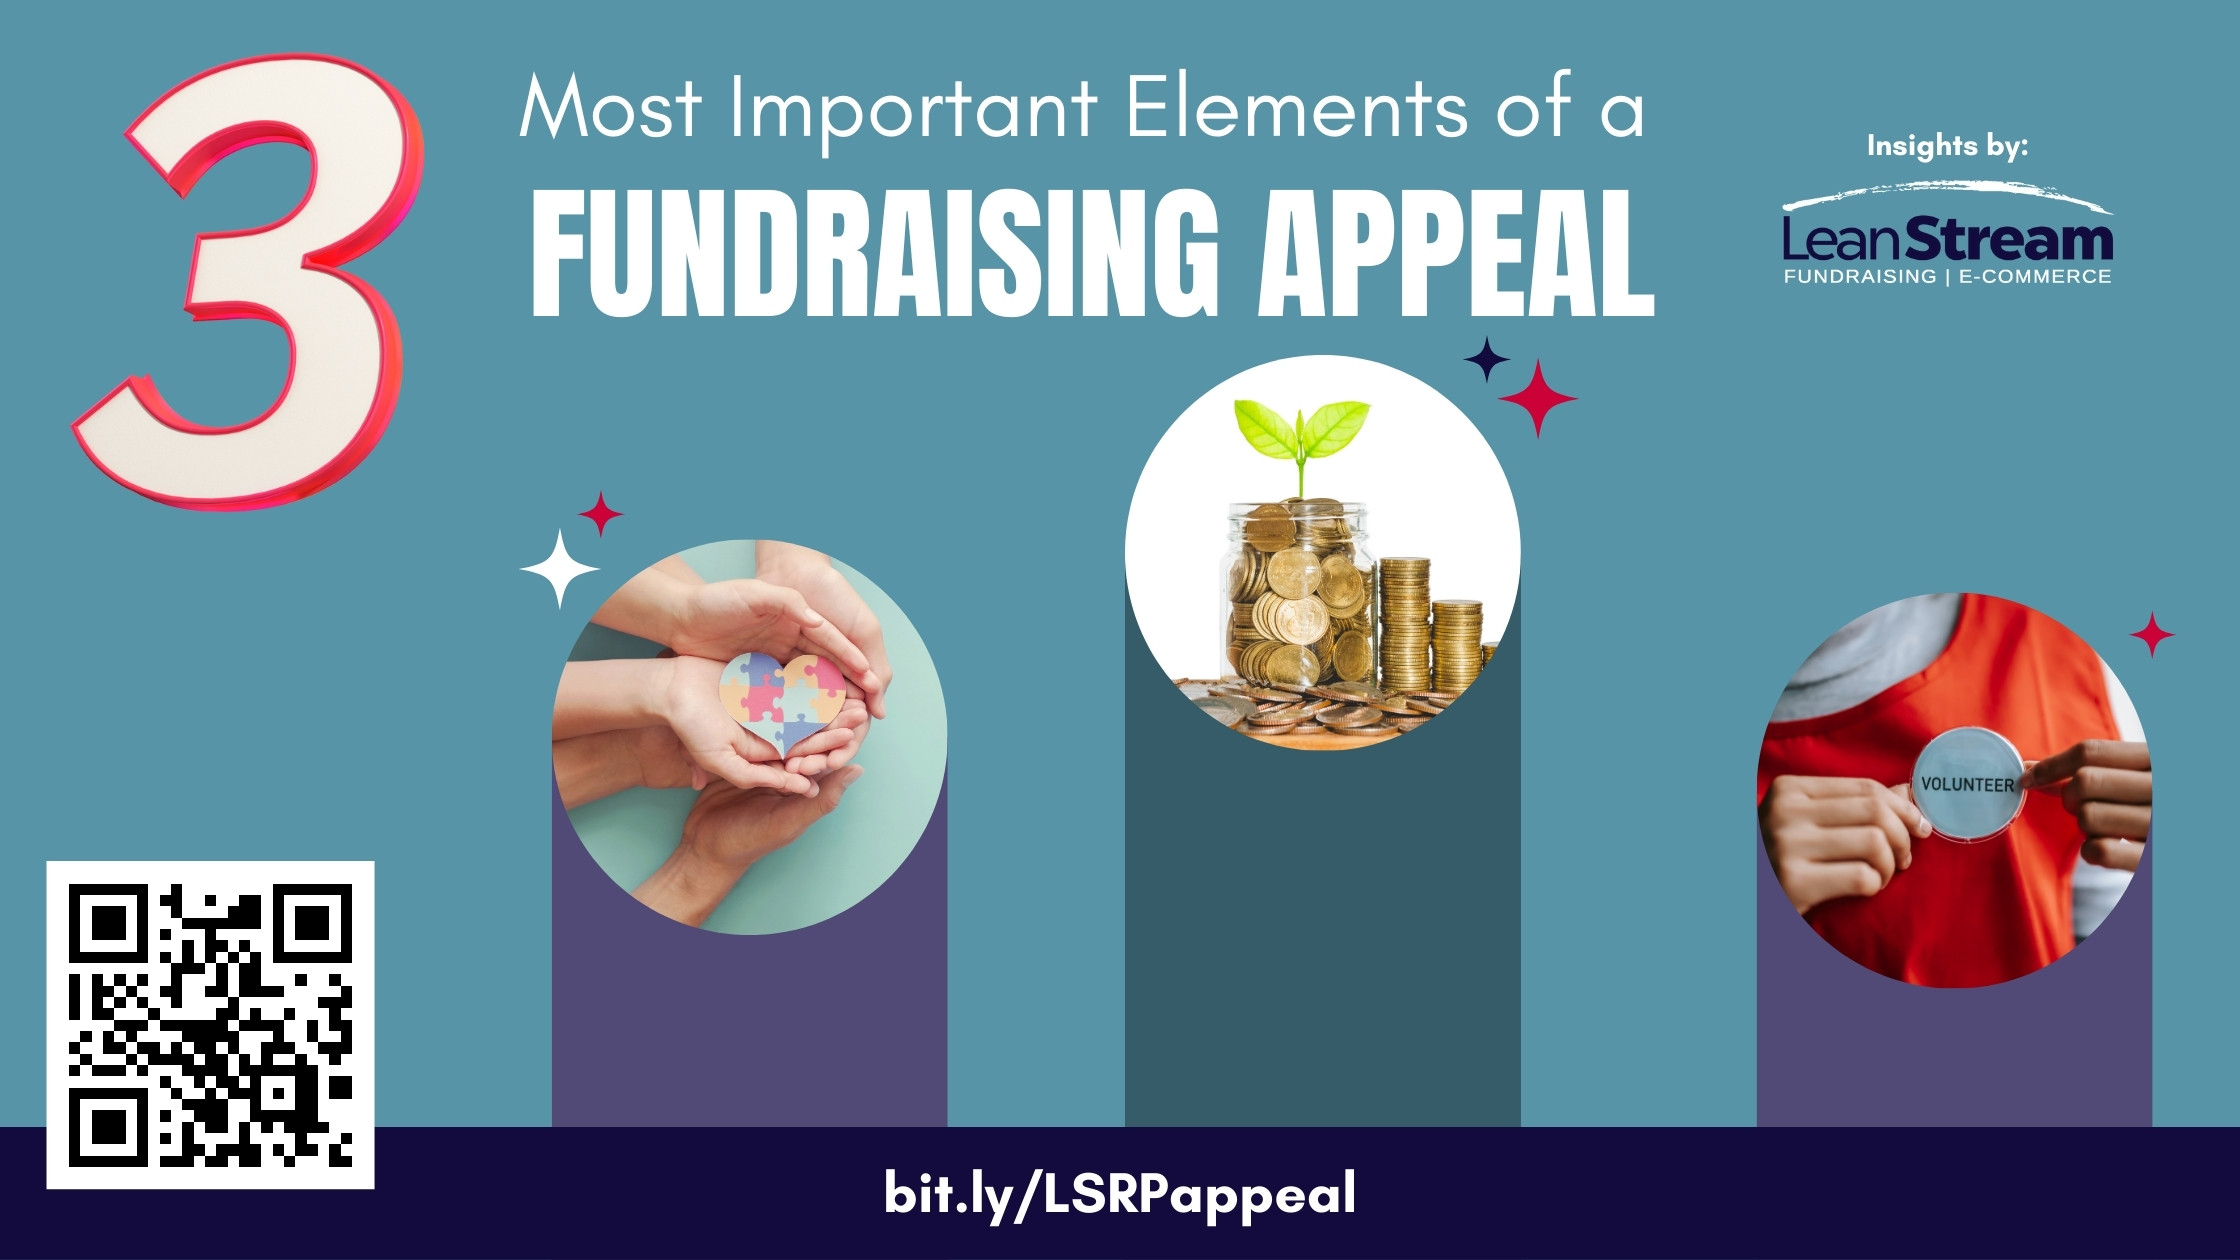 3 Most Important Elements of a Fundraising Appeal